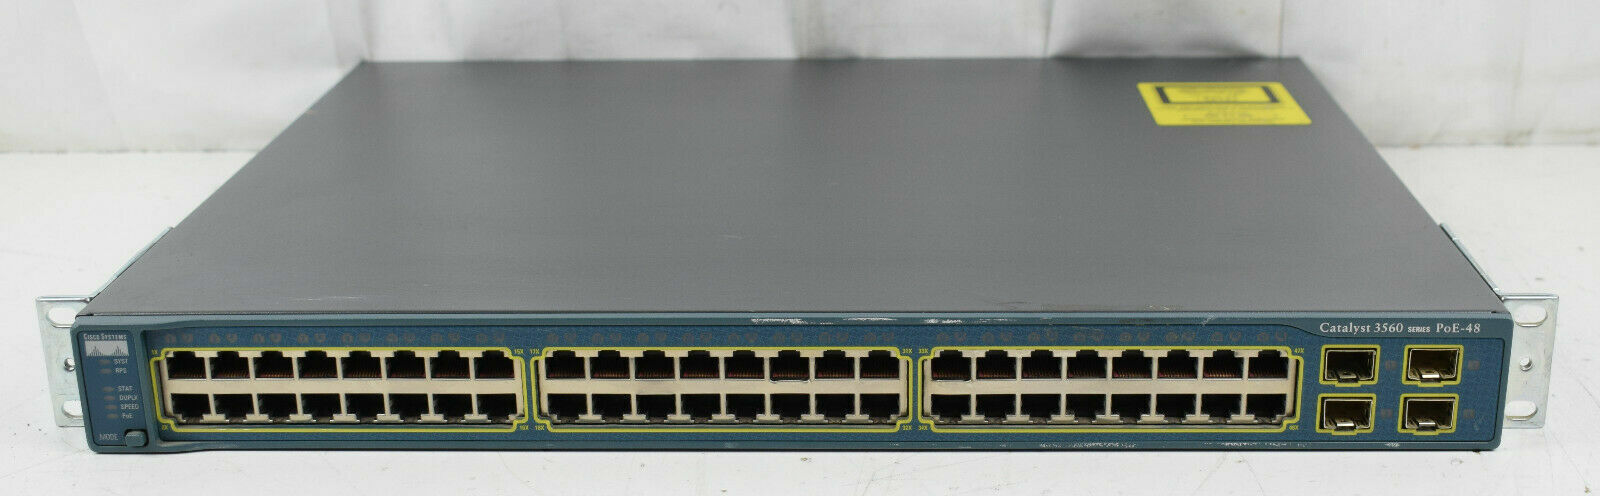 Cisco WS-C3560-48PS-S 48-Ports Layer 3 PoE Ethernet Switch